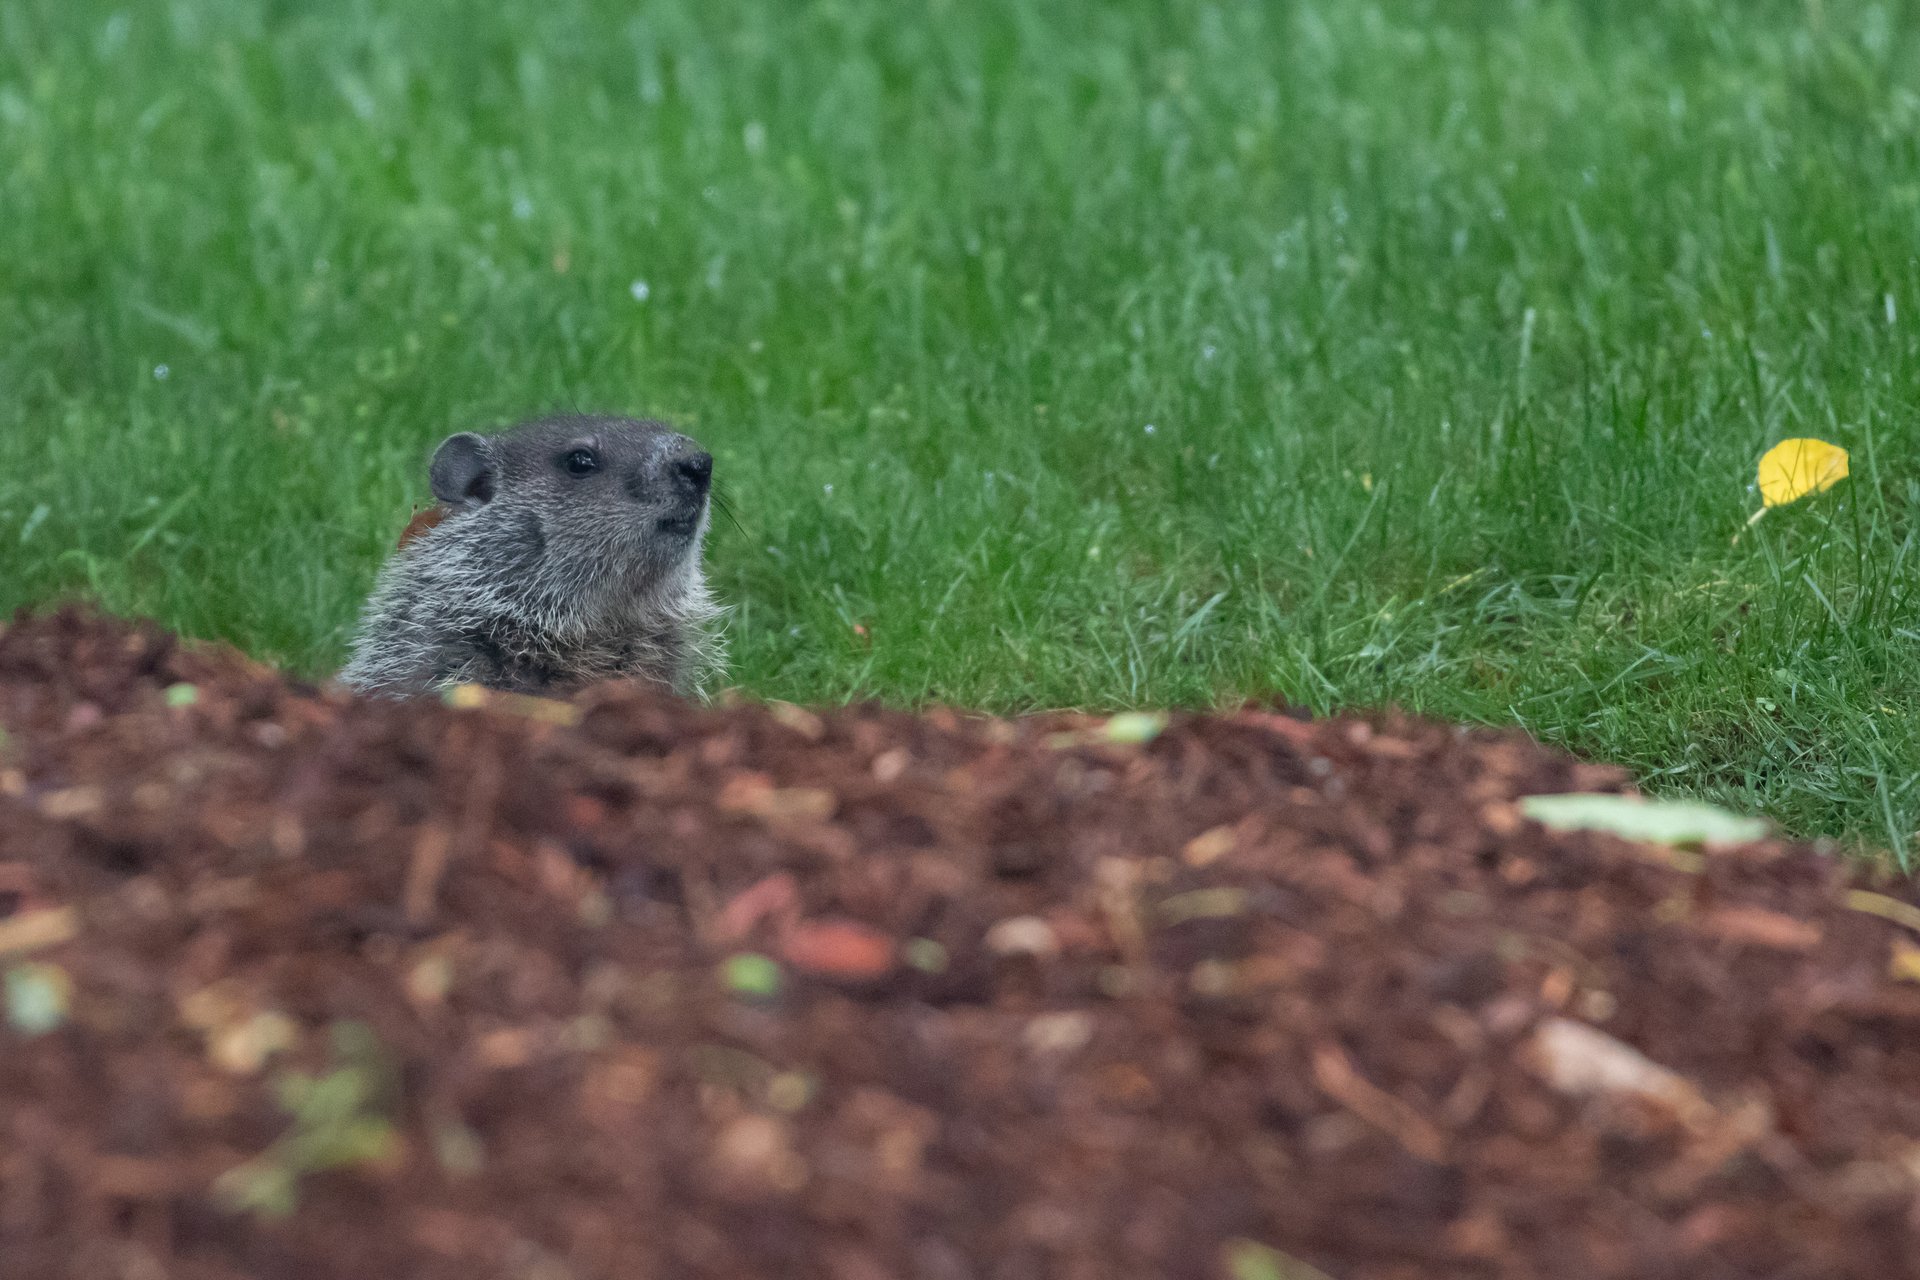 Groundhog sticking head out of the ground.